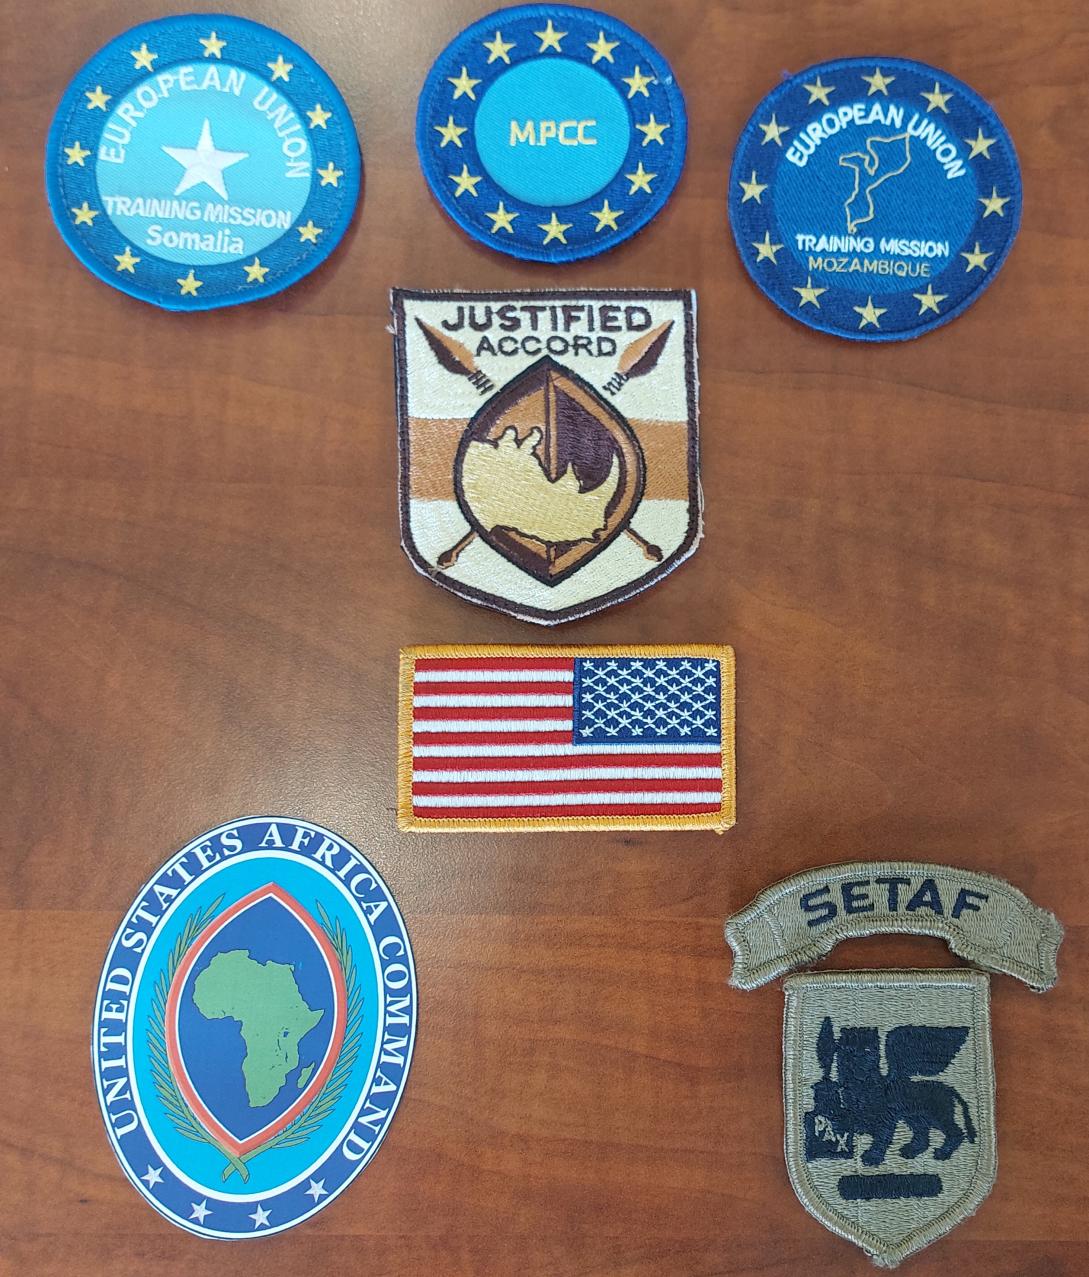 A group of mission patches